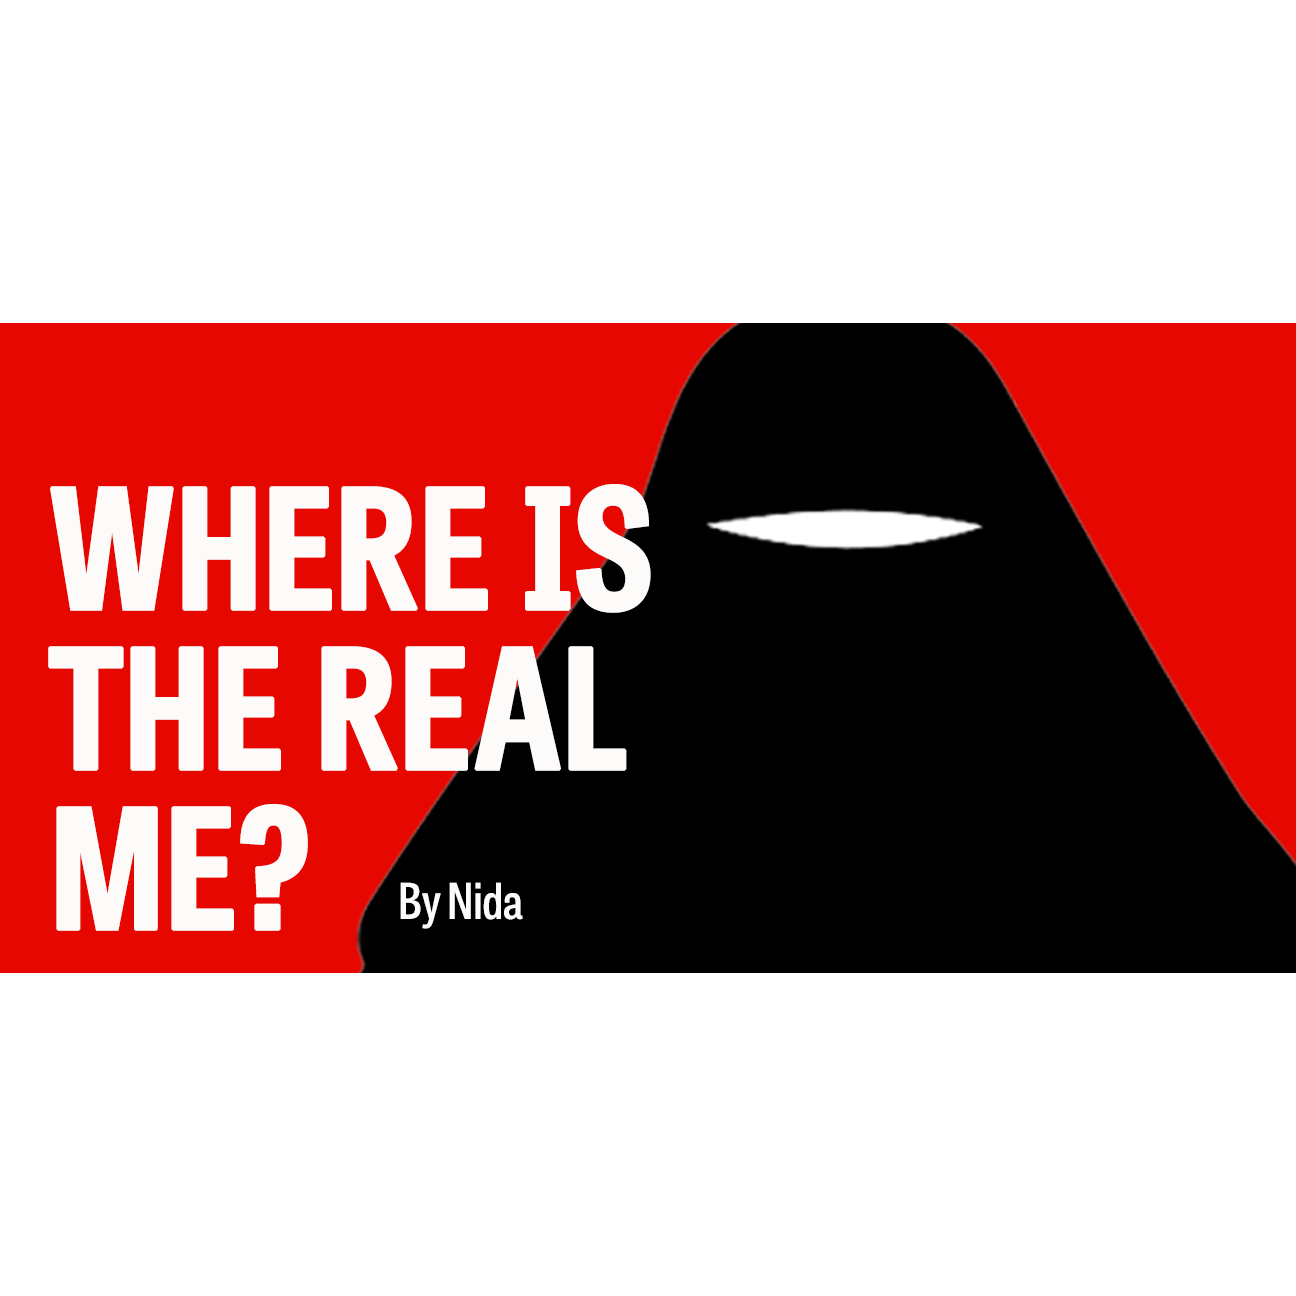 Where is the real me? – vday.org